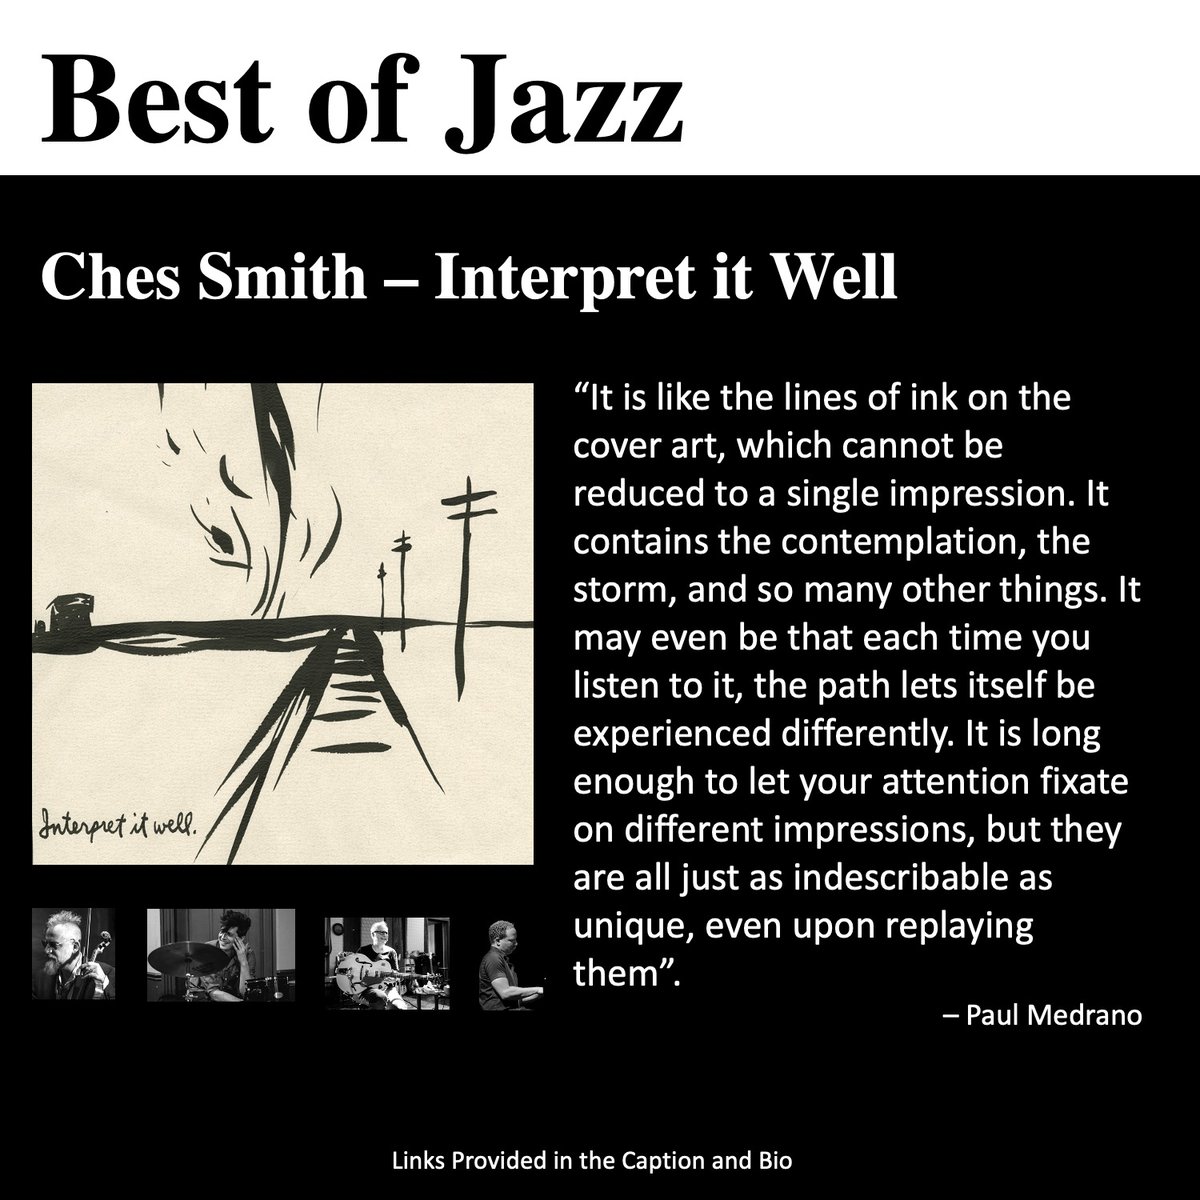 “It contains the contemplation, the storm, and so many other things. It may even be that each time you listen to it, the path lets itself be experienced differently.' – Paul Medrano bestofjazz.org/ches-smith-int…